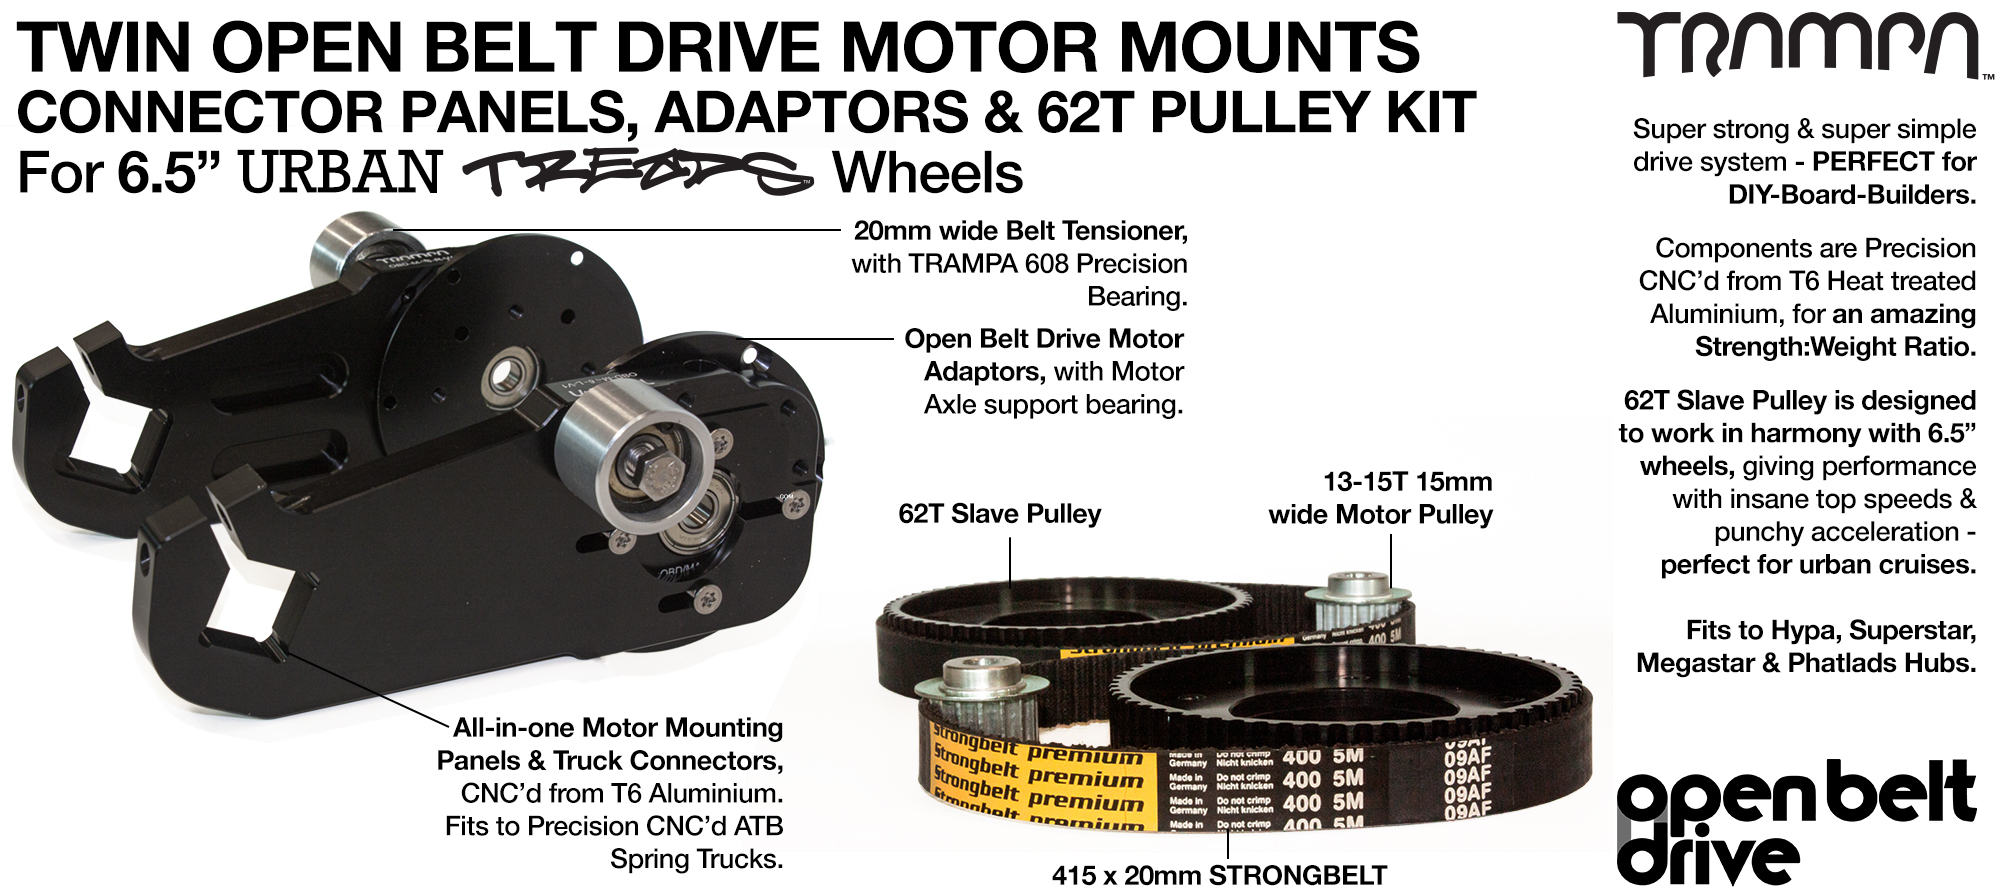 66T OBD Motor Mount WITH 62 tooth Pulley - TWIN